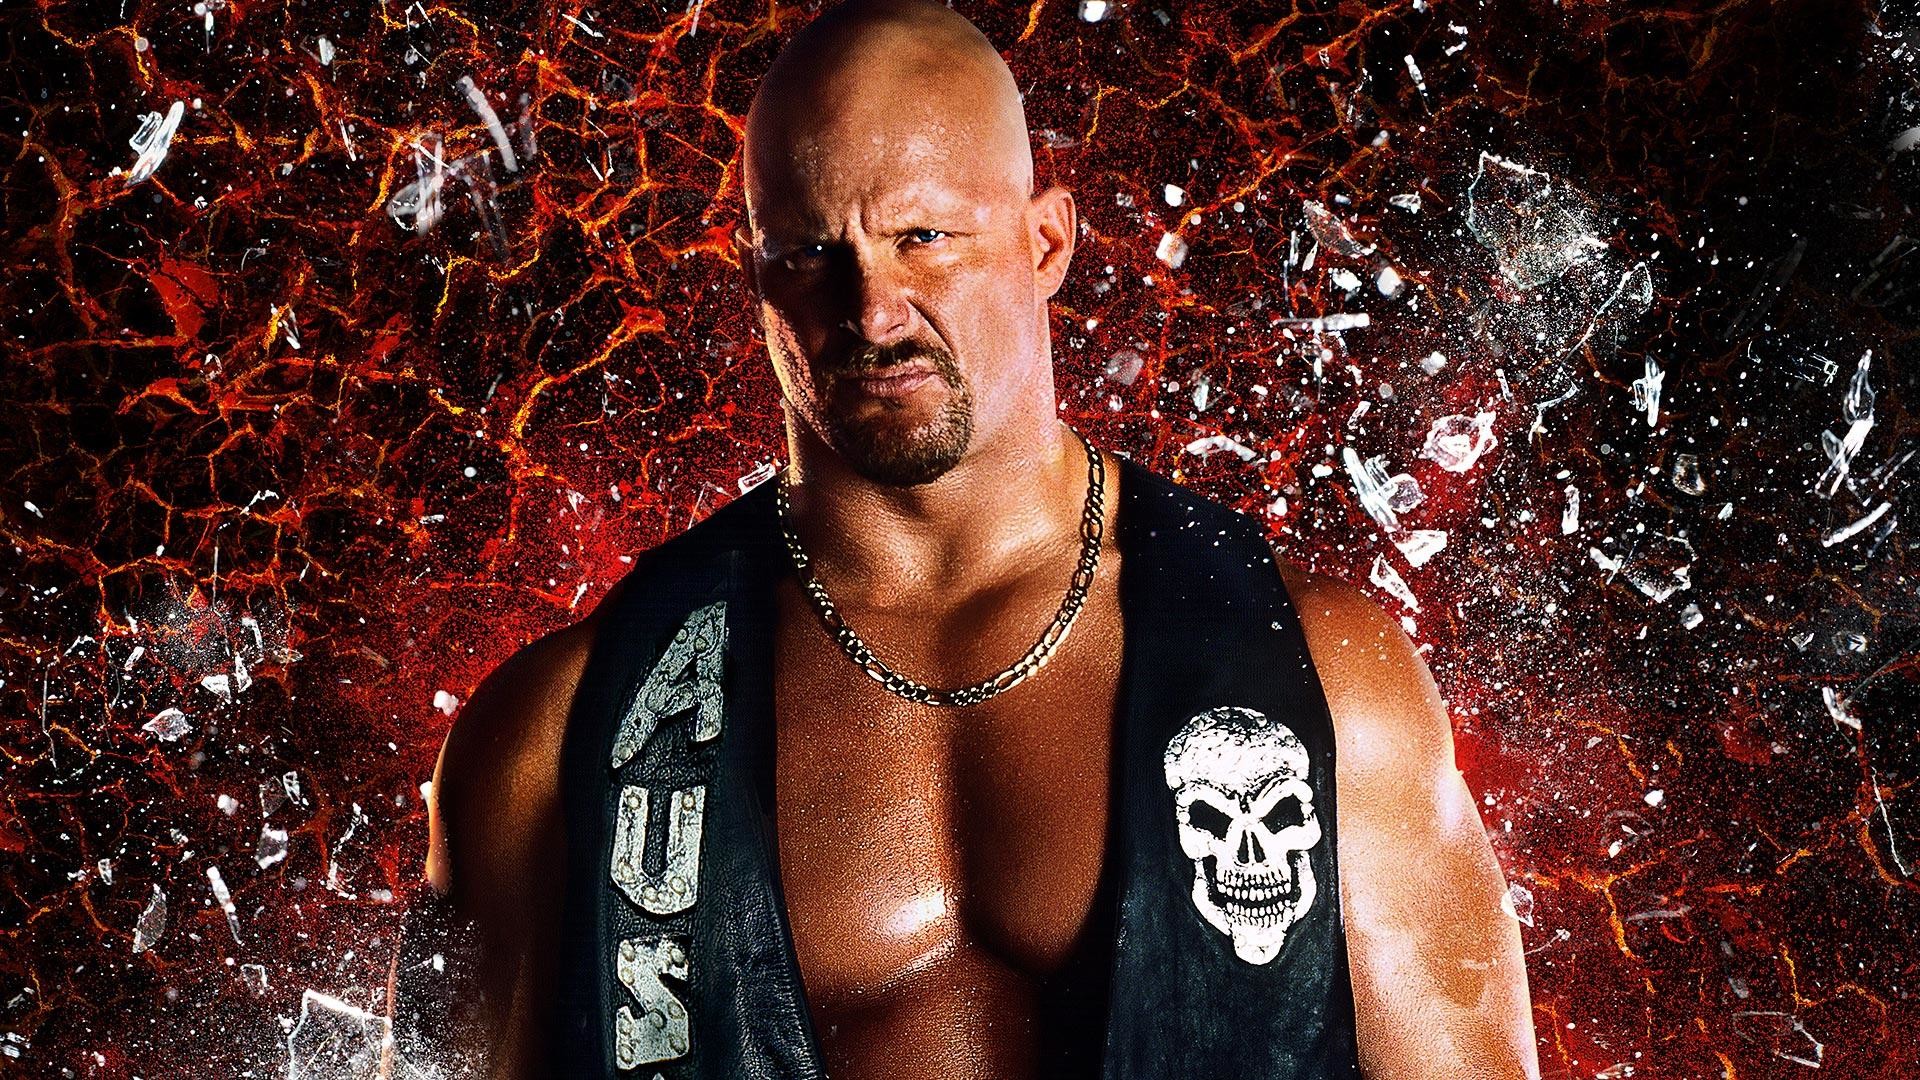 Steve Austin Wallpapers (83+ pictures)